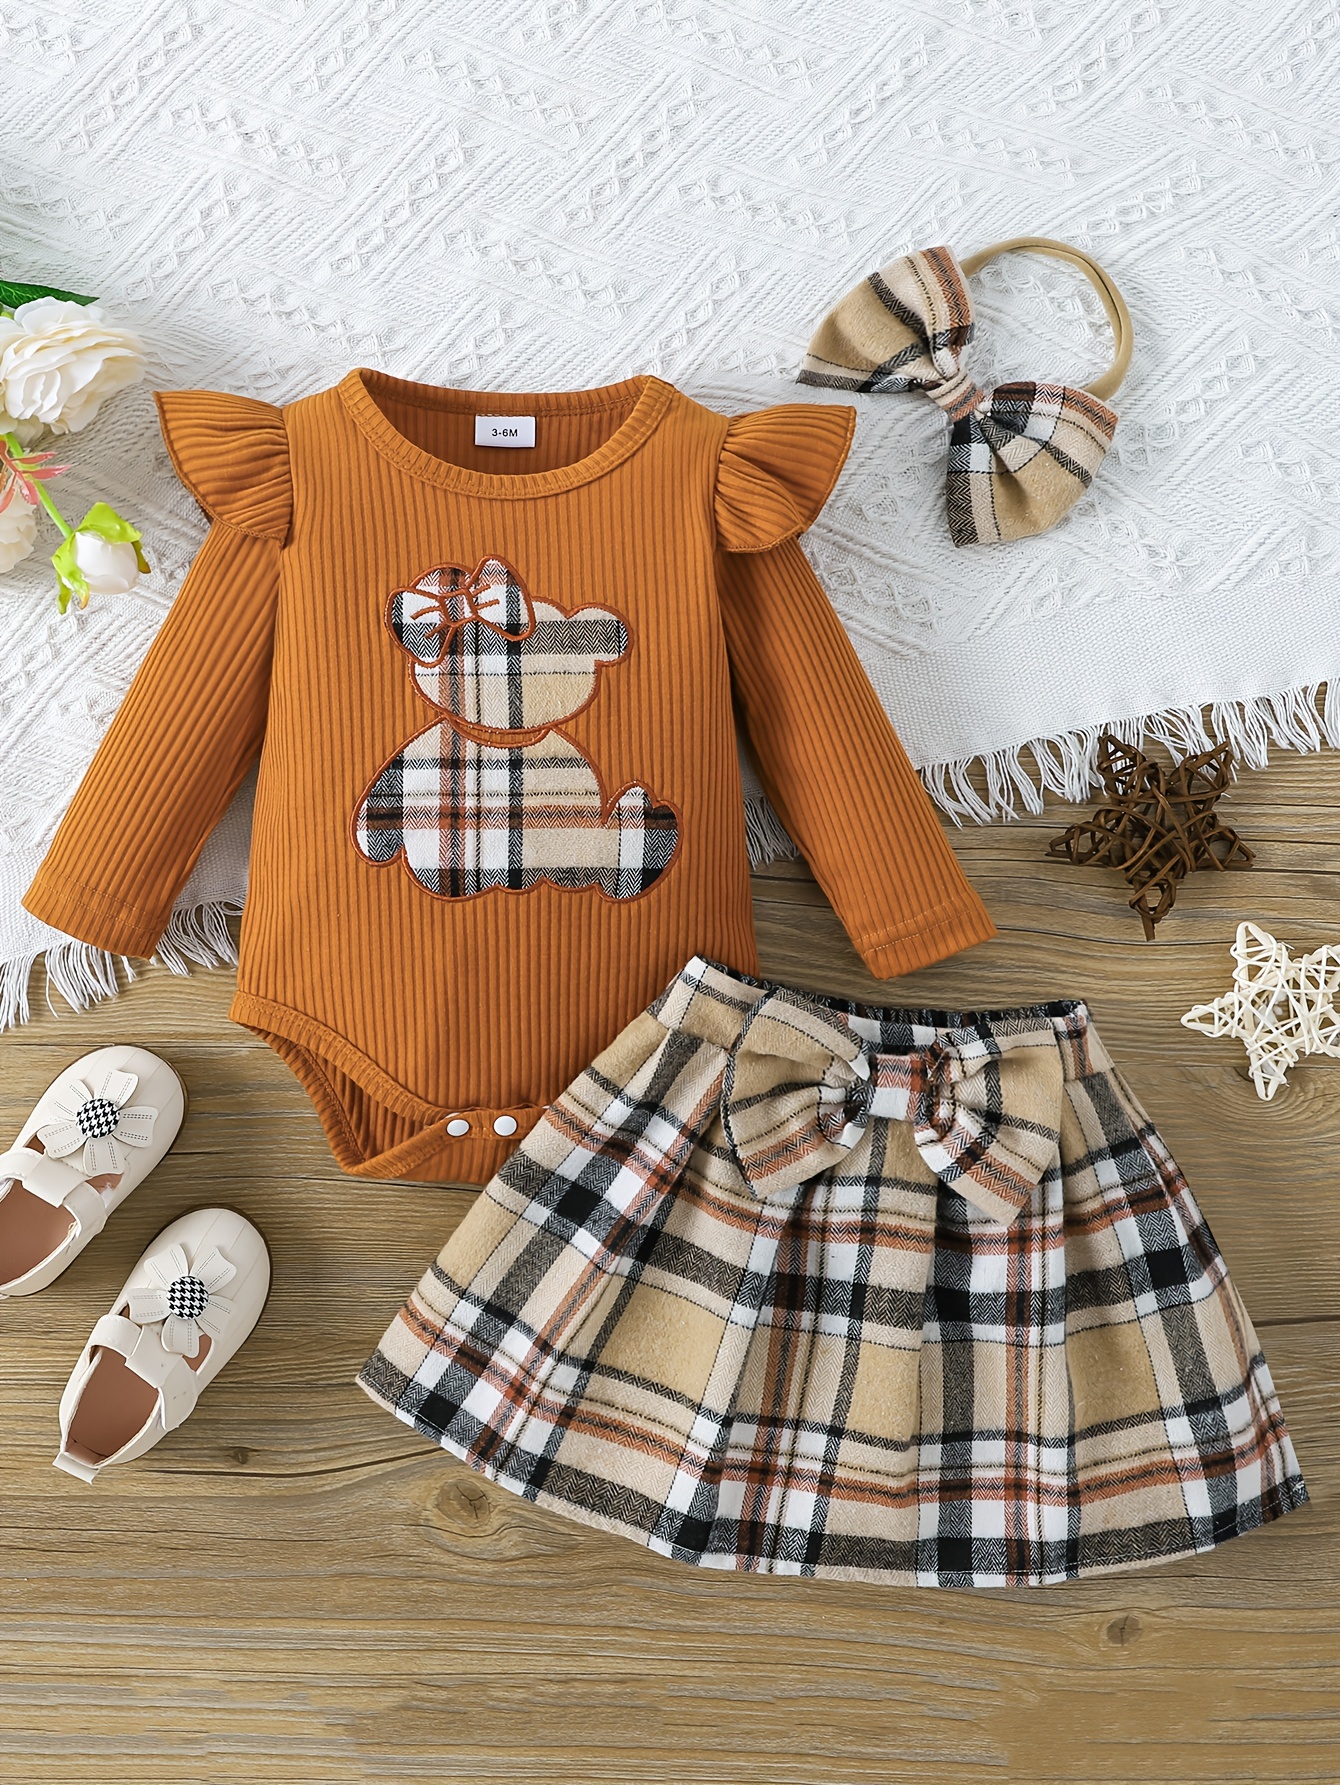 Renotemy Toddler Girl Winter Clothes Fall Spring Outfits Long